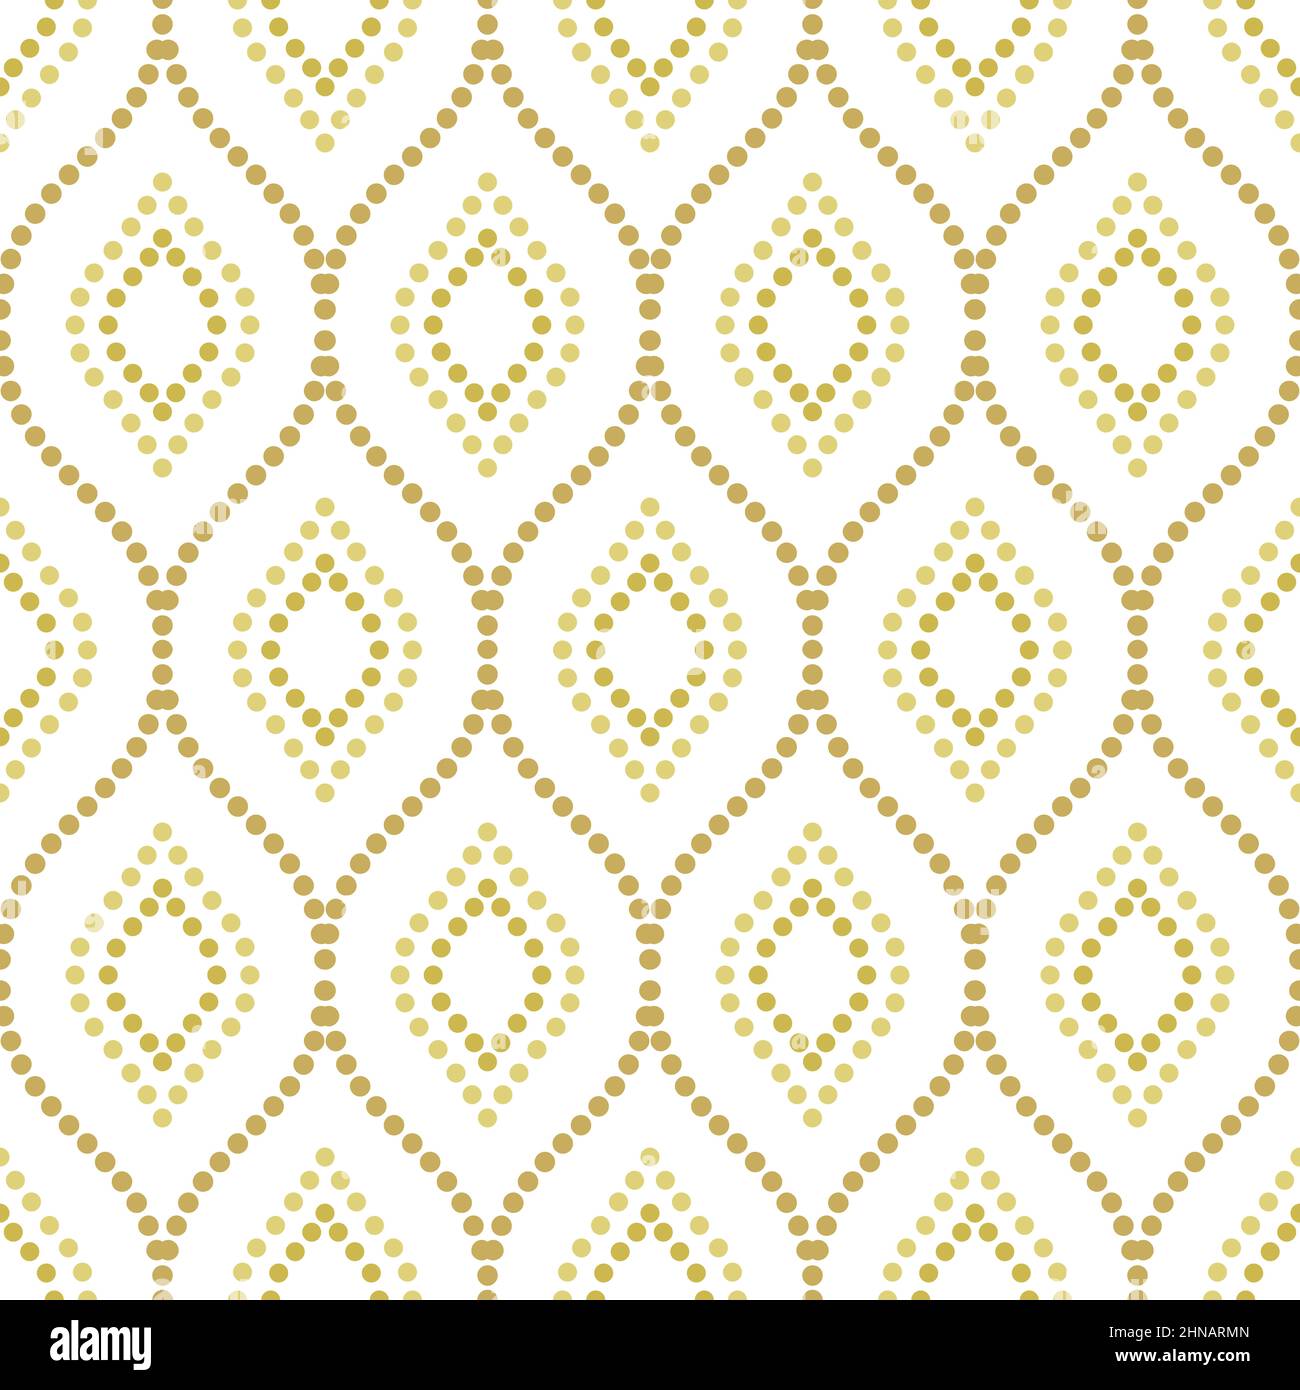 Seamless ornament. Modern background with golden dotted pattern. Geometric modern pattern Stock Photo